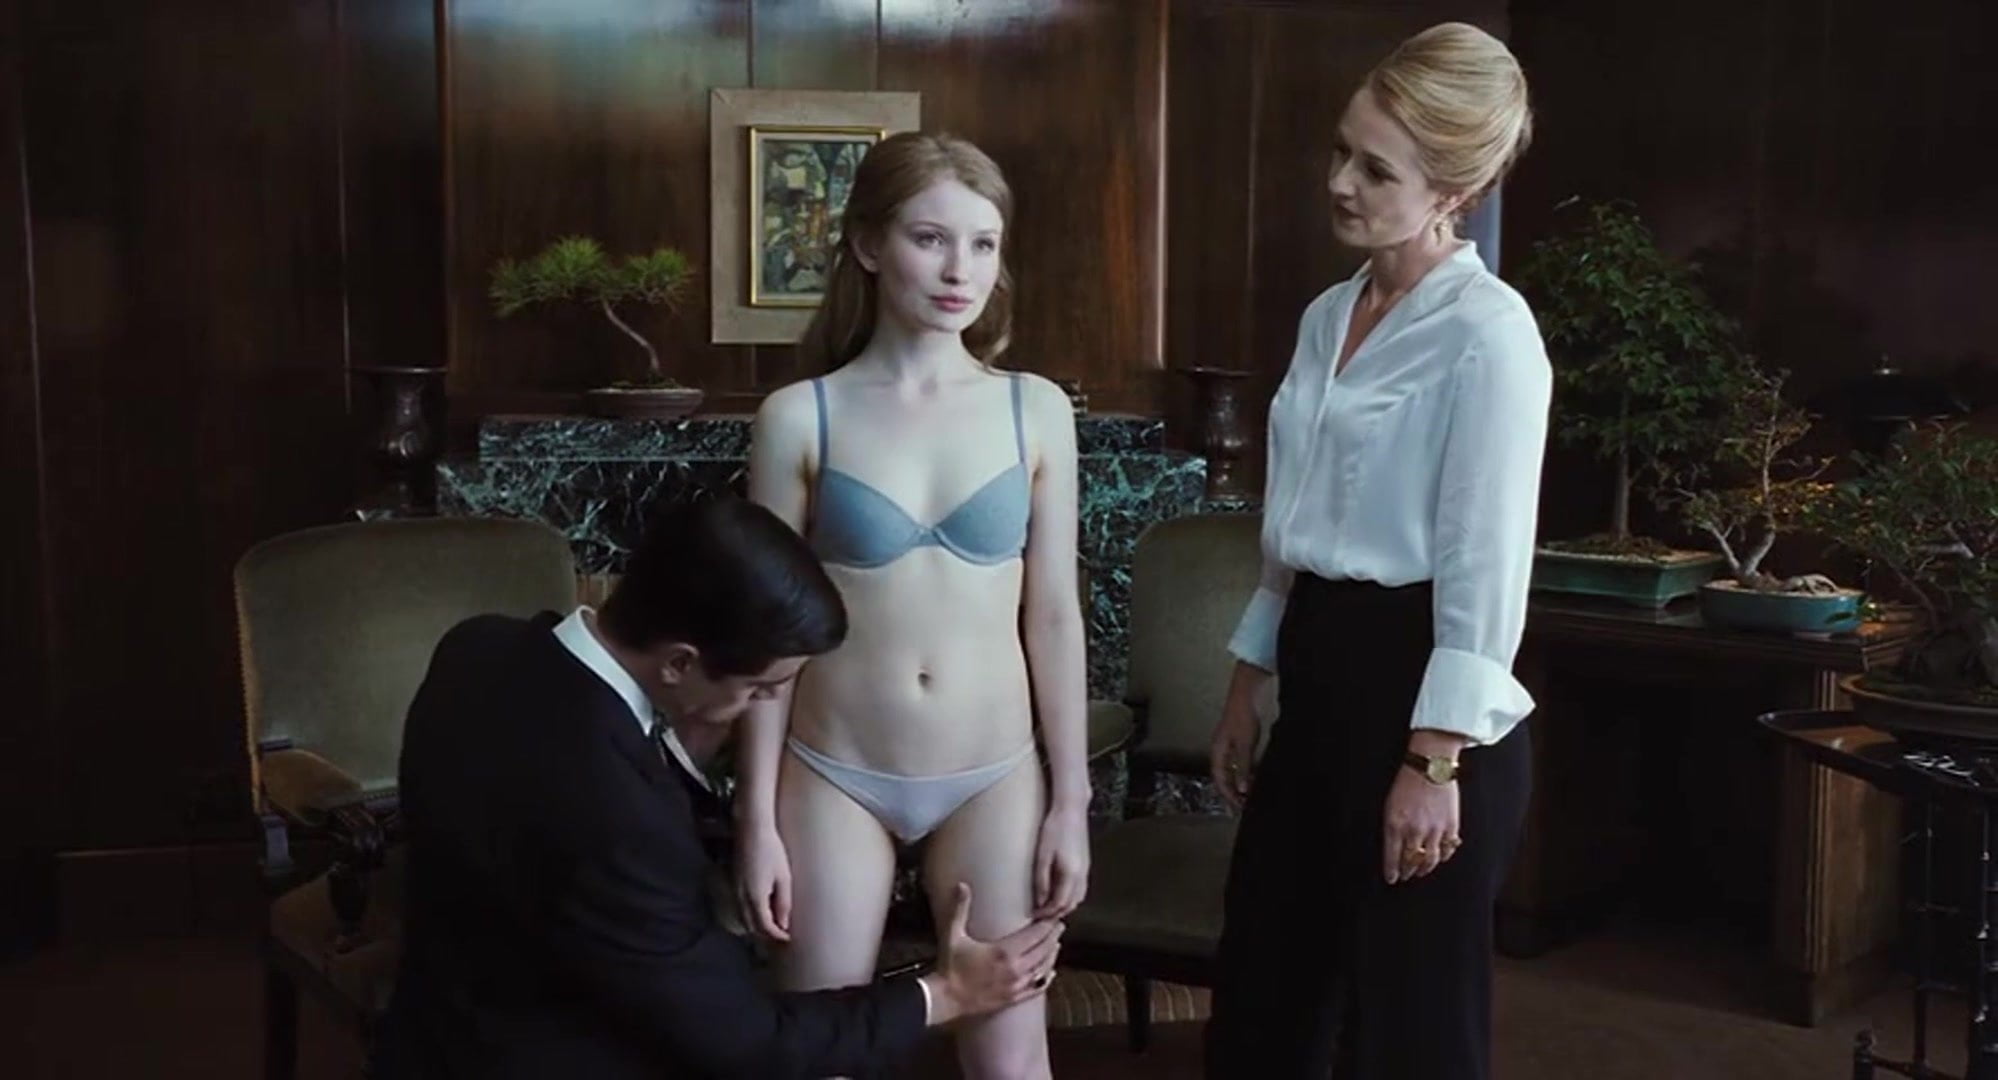 Browning tits emily Emily Browning